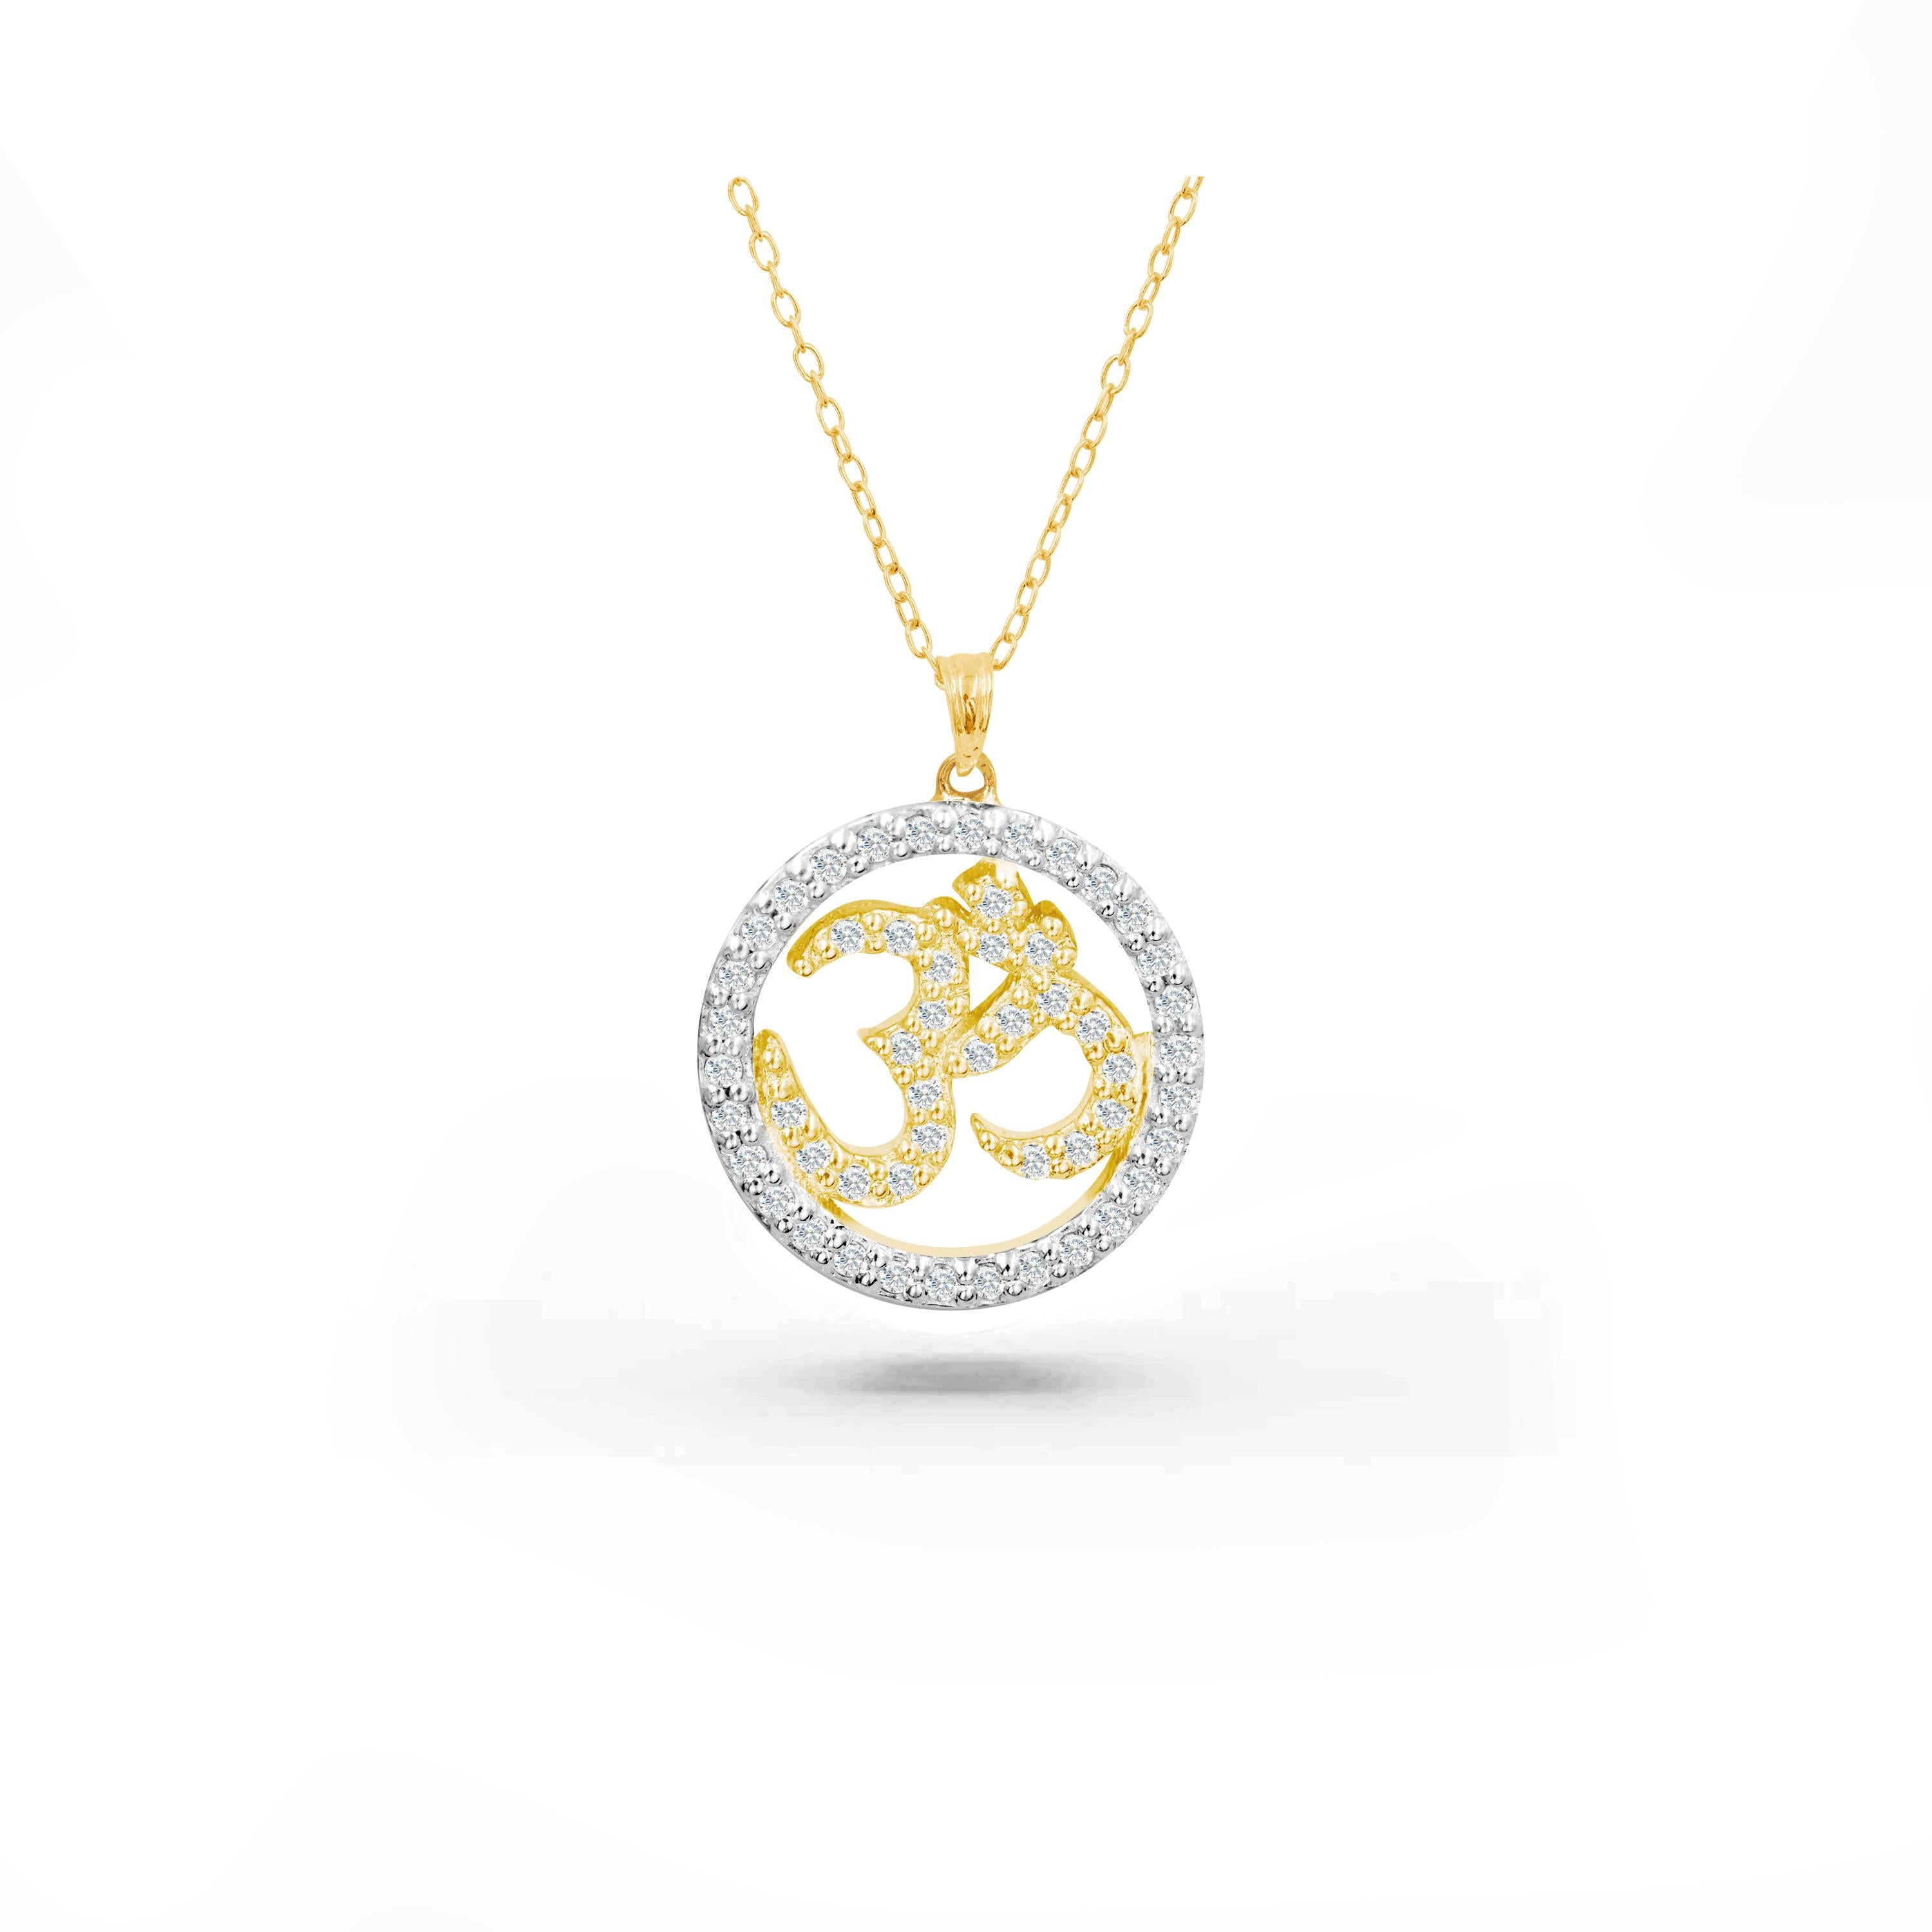 The Handcrafted OM Halo diamond necklace is perfect everyday wear to bring inner peace and spirituality. We guarantee top-notch quality with 0.34 carat diamond beautifully set in this necklace.  This Hindu necklace can be customized to your choice